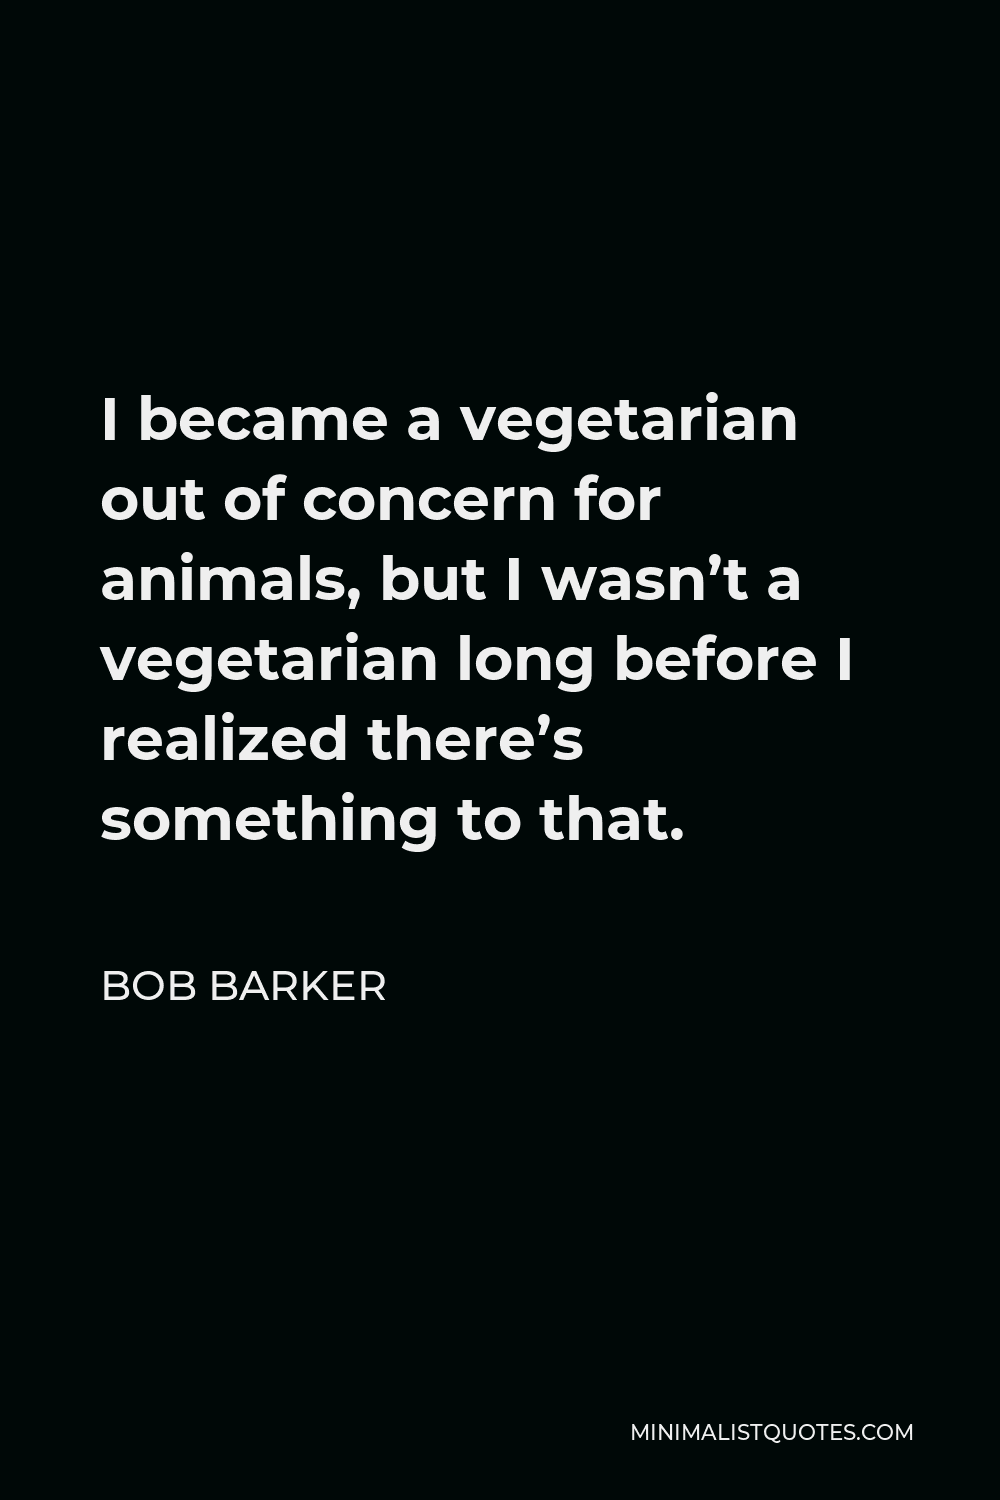 Bob Barker Quote - I became a vegetarian out of concern for animals, but I wasn’t a vegetarian long before I realized there’s something to that.